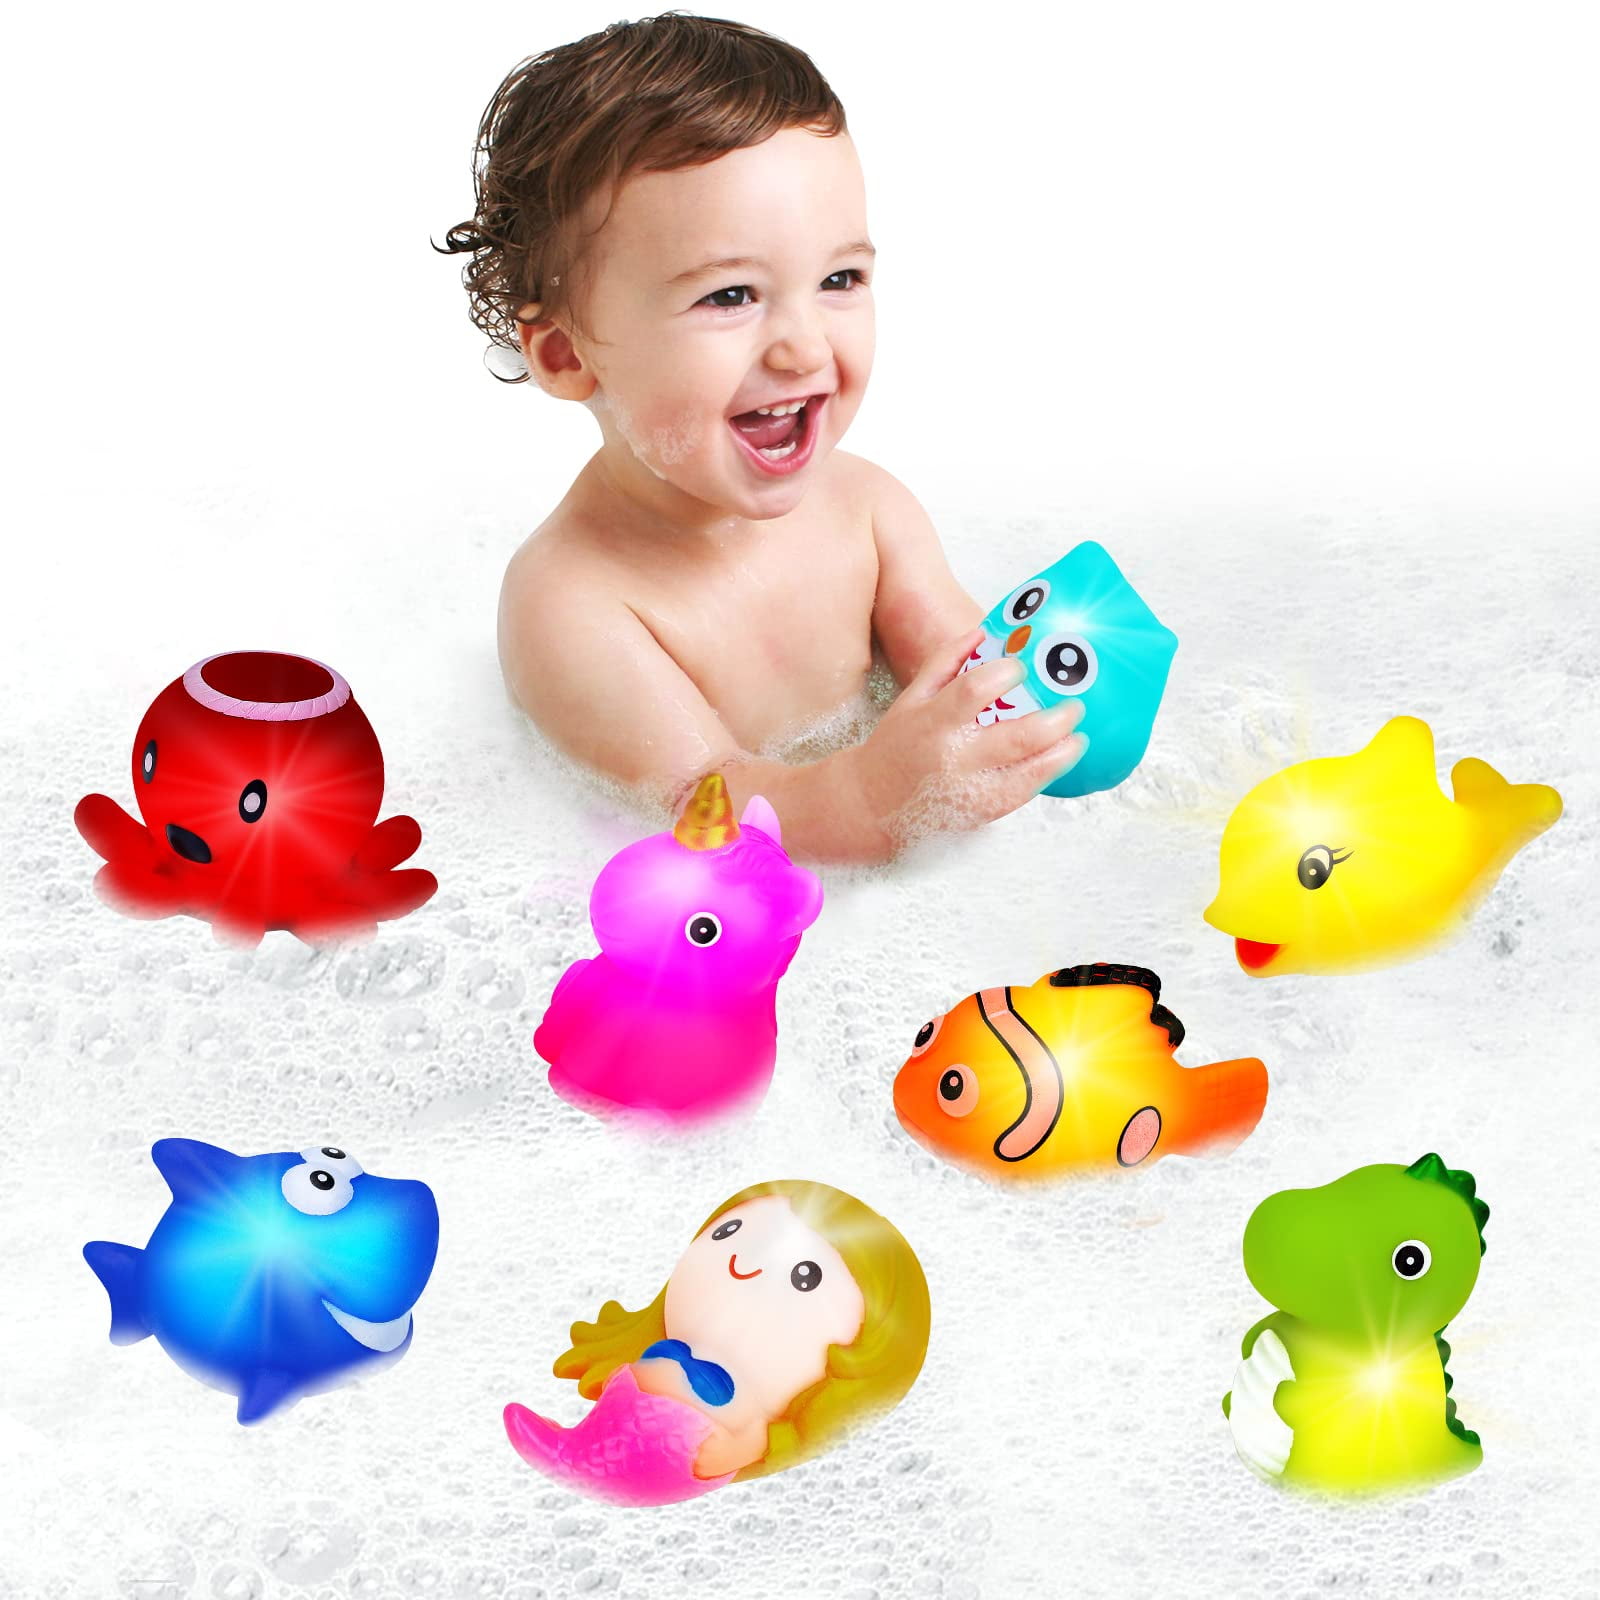 Baby Products Online - 34 pcs bath toys, bath toys for toddlers 1